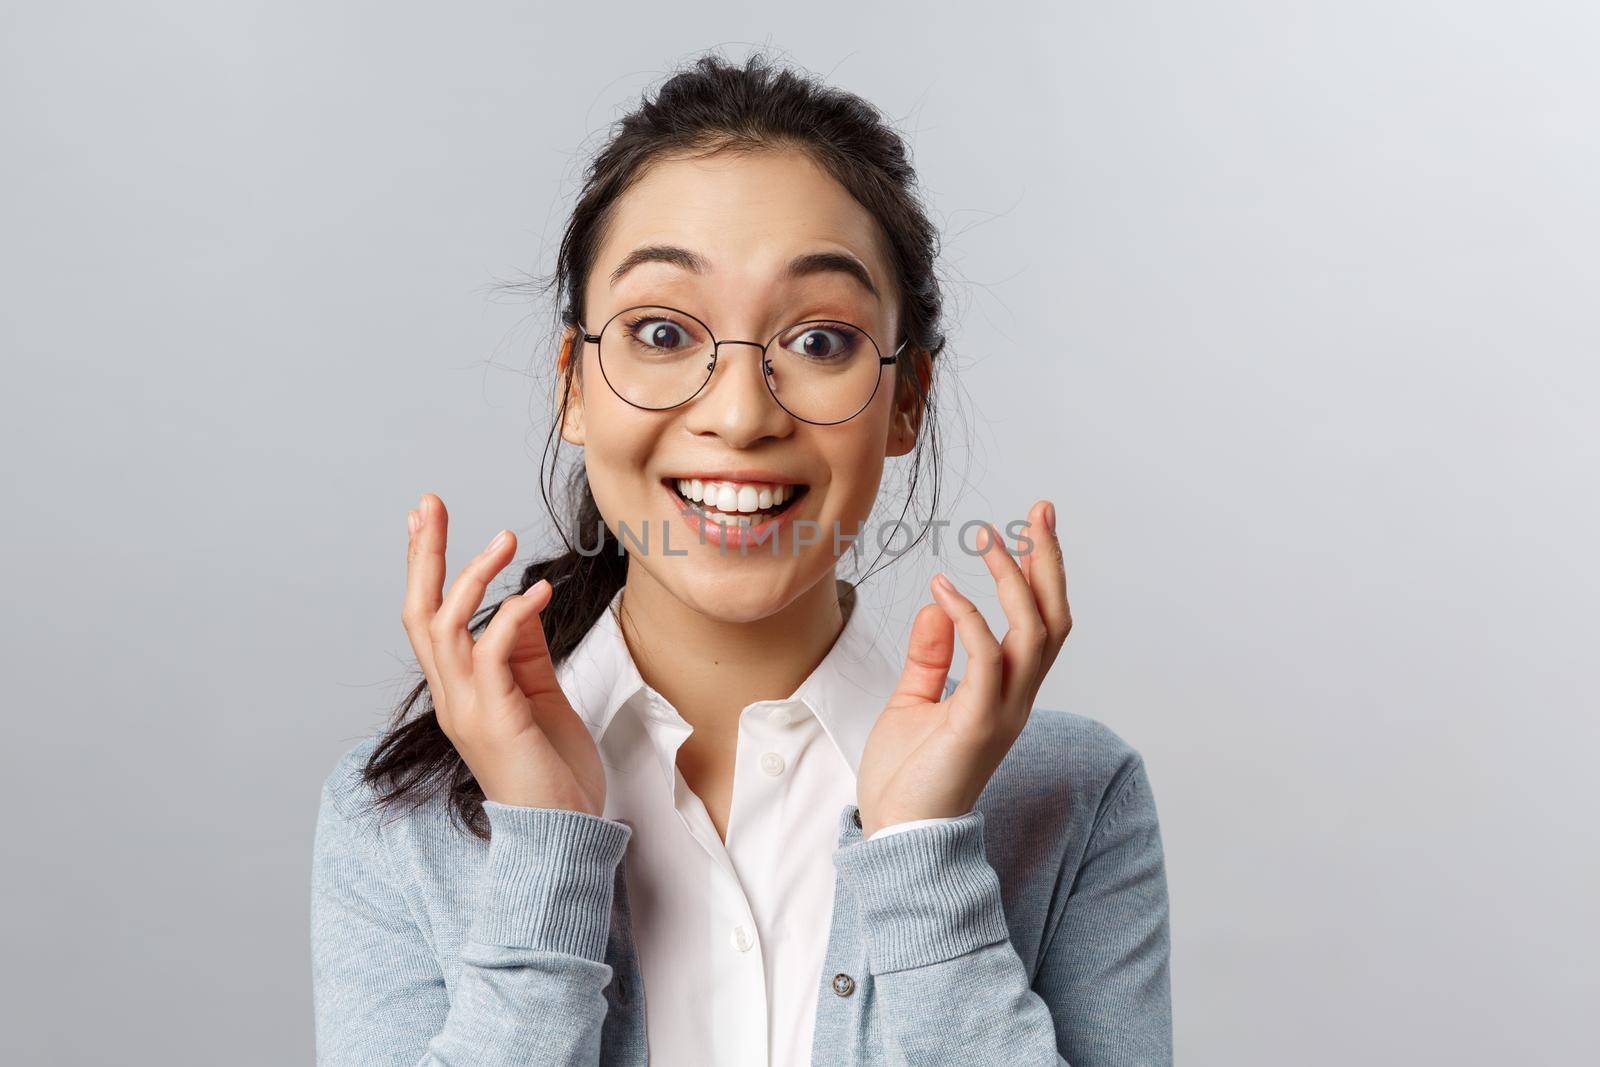 Close-up portrait of rejoicing, surprised asian woman in glasses, happy for person, hear great awesome news, realise something good happened, she won or got promoted, grinning joyfully.